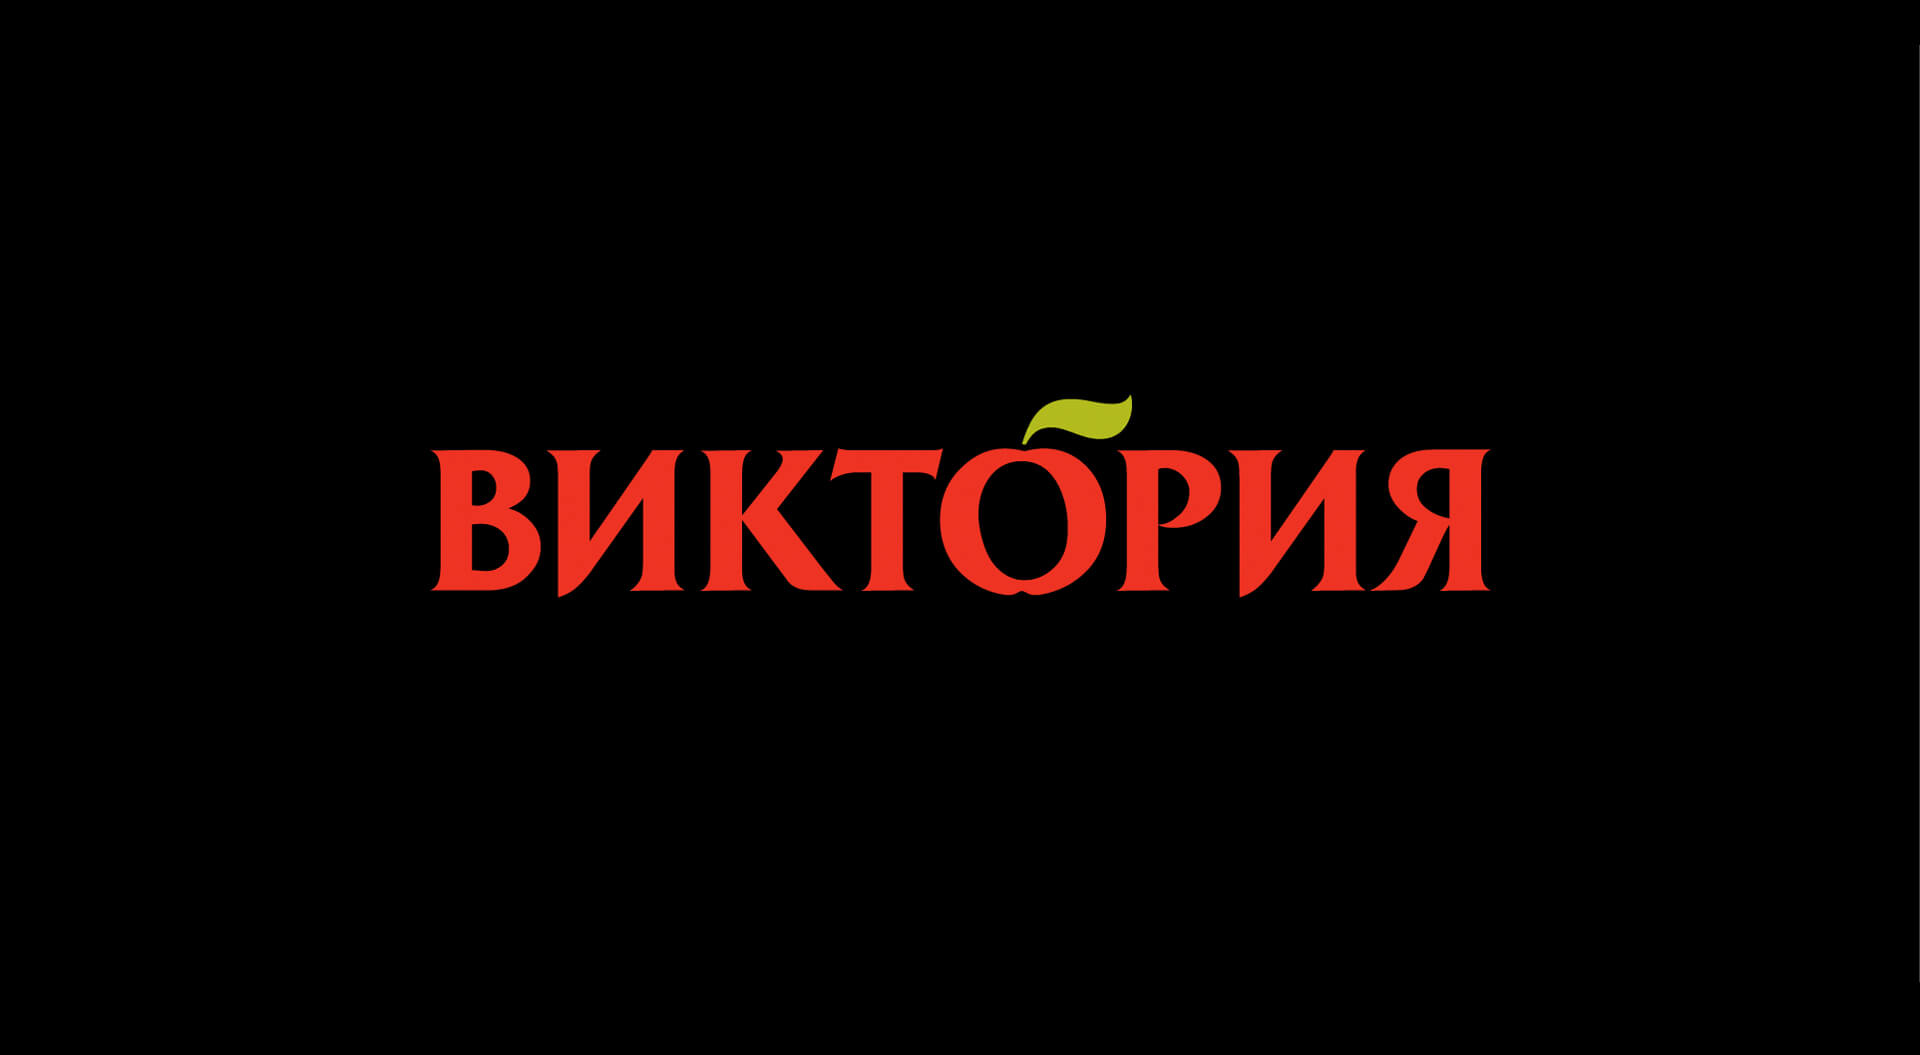 Brand identity marketing strategy grocery food retail, interior store design supermarket branding, innovative concepts and ideas Victoria Russian 